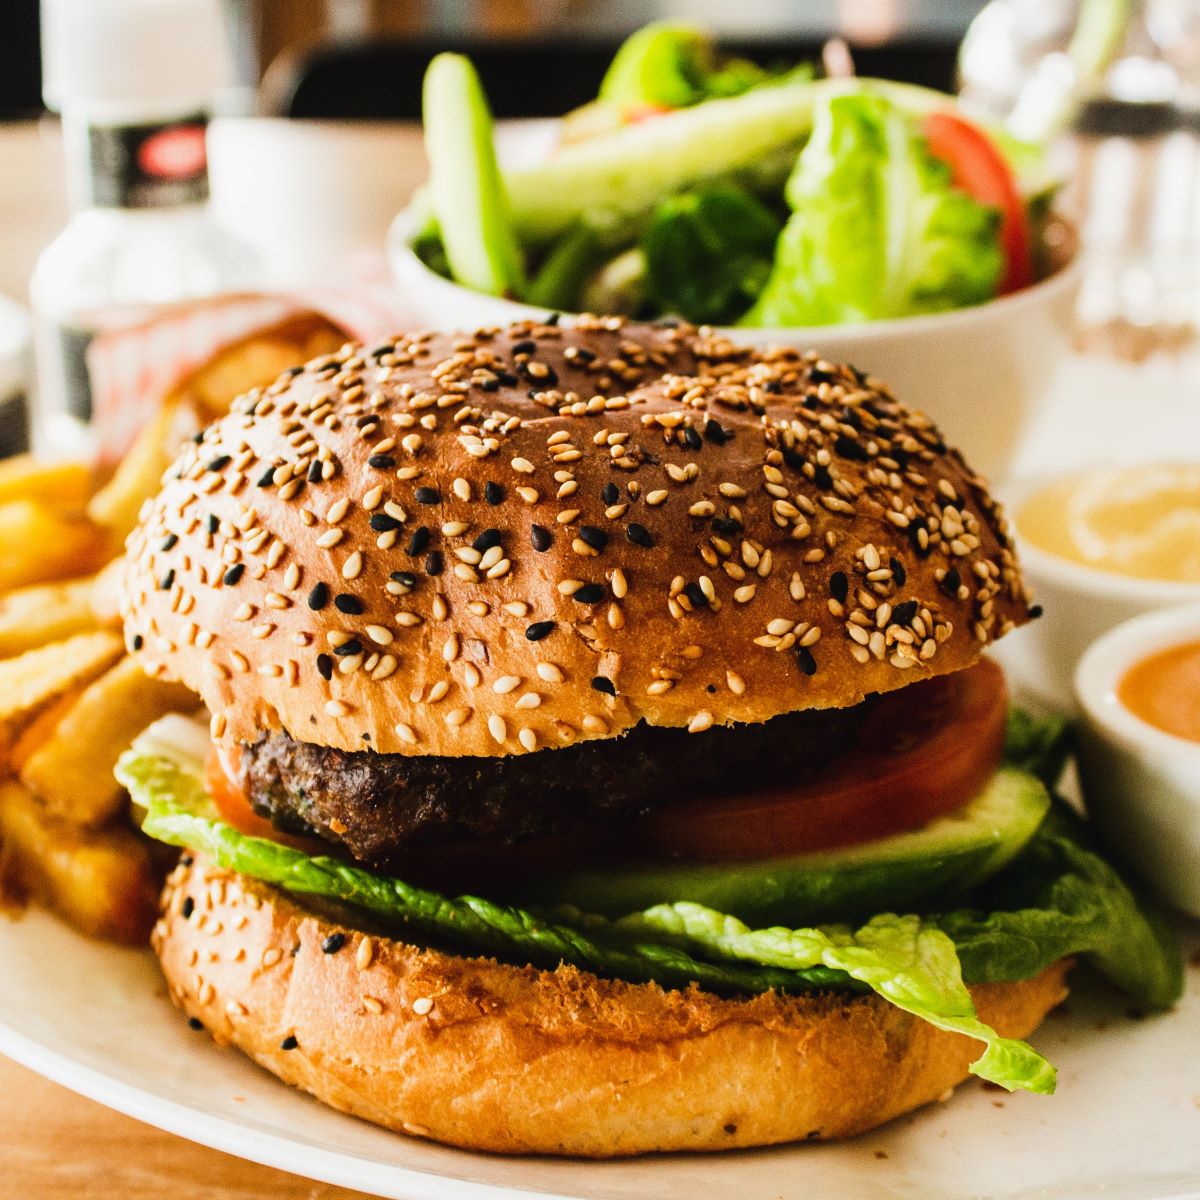 A veggie burge surrounded by a salad and a plate of fries.